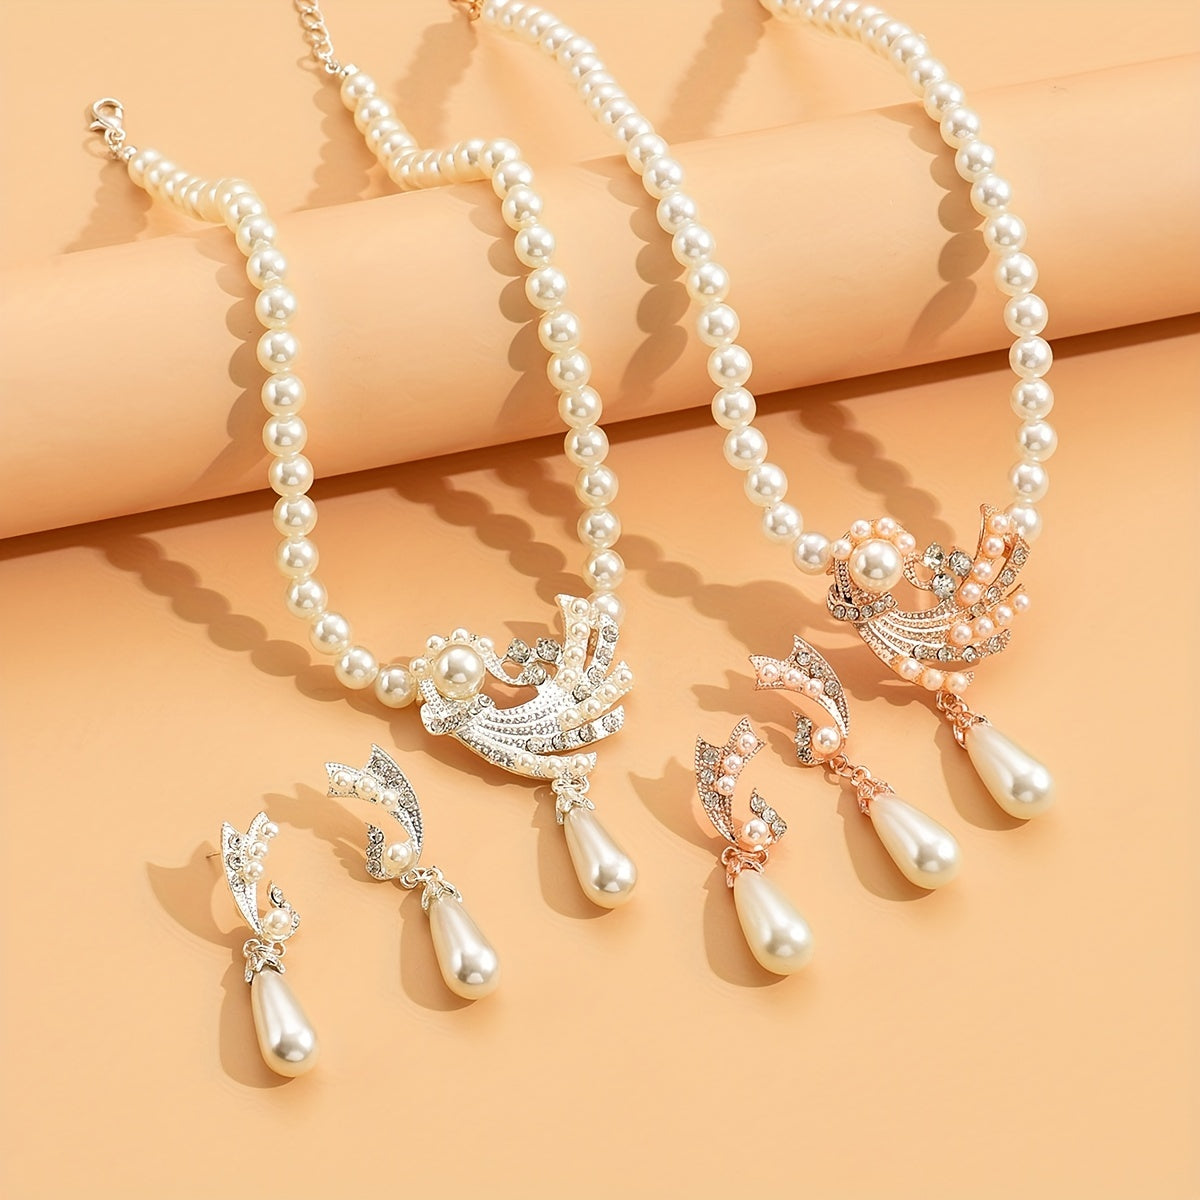 Elegant 18K Gold Plated Faux Pearl Teardrop Pendant Necklace and Dangle Earrings Set - Perfect for Birthdays, Parties, and Anniversaries